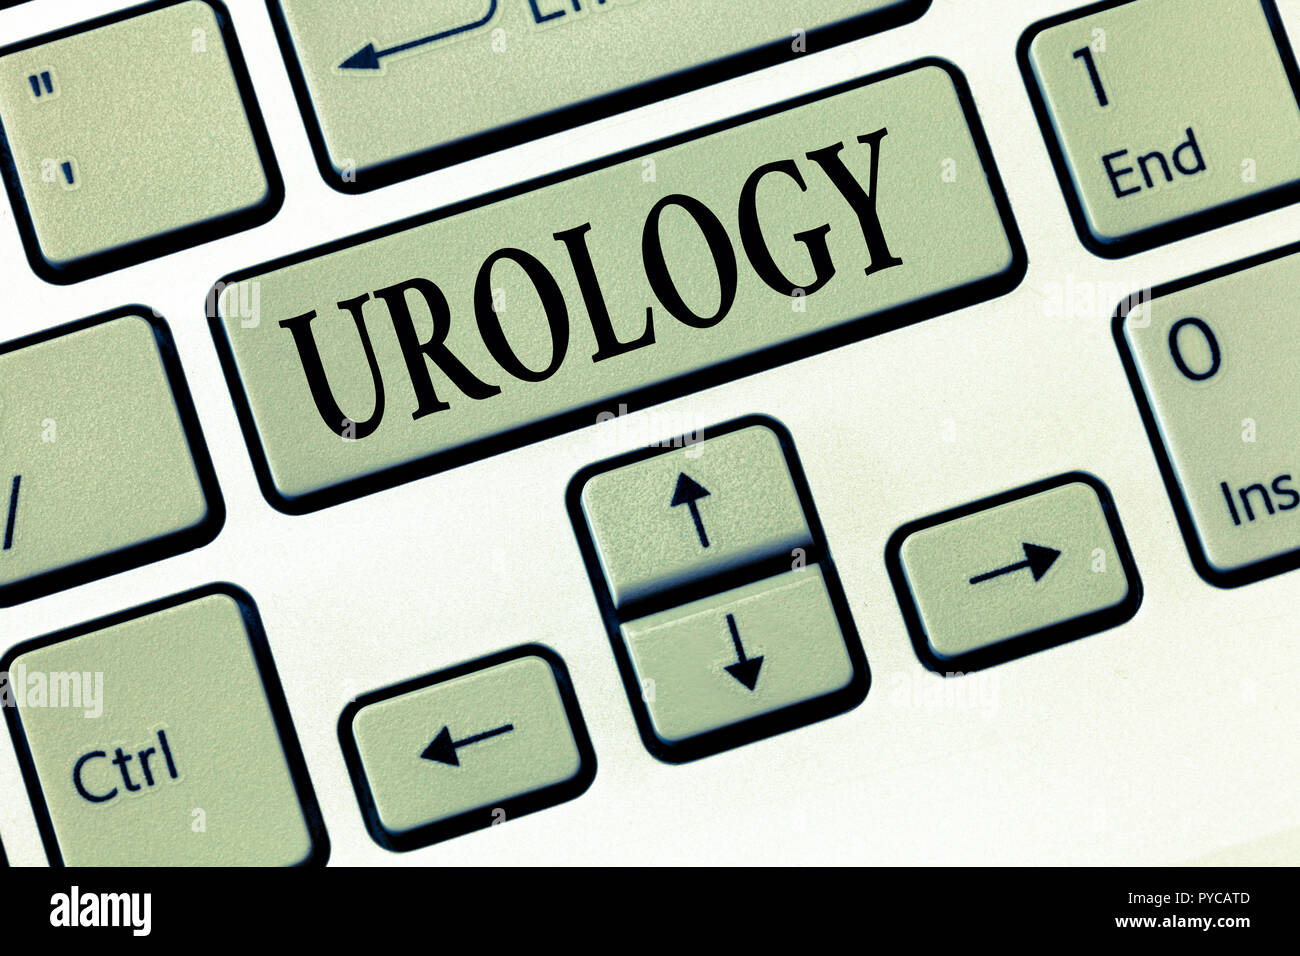 Word writing text Urology. Business concept for Medicine branch related with urinary system function and disorders. Stock Photo